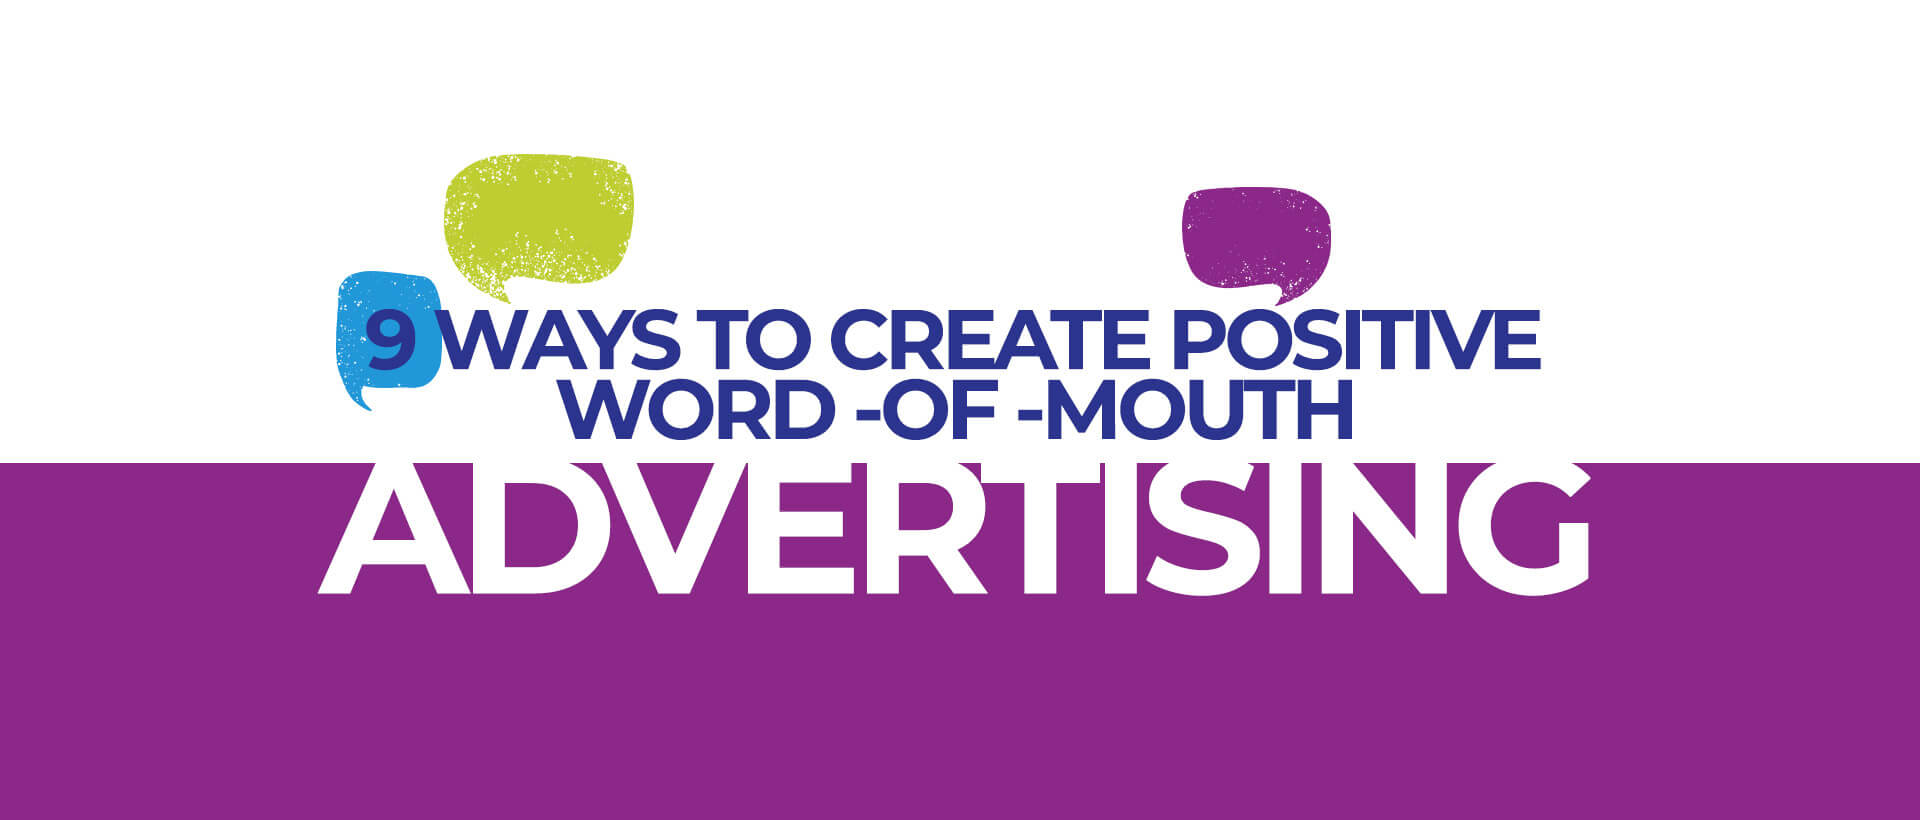 9 WAYS TO CREATE POSITIVE WORD -OF -MOUTH ADVERTISING